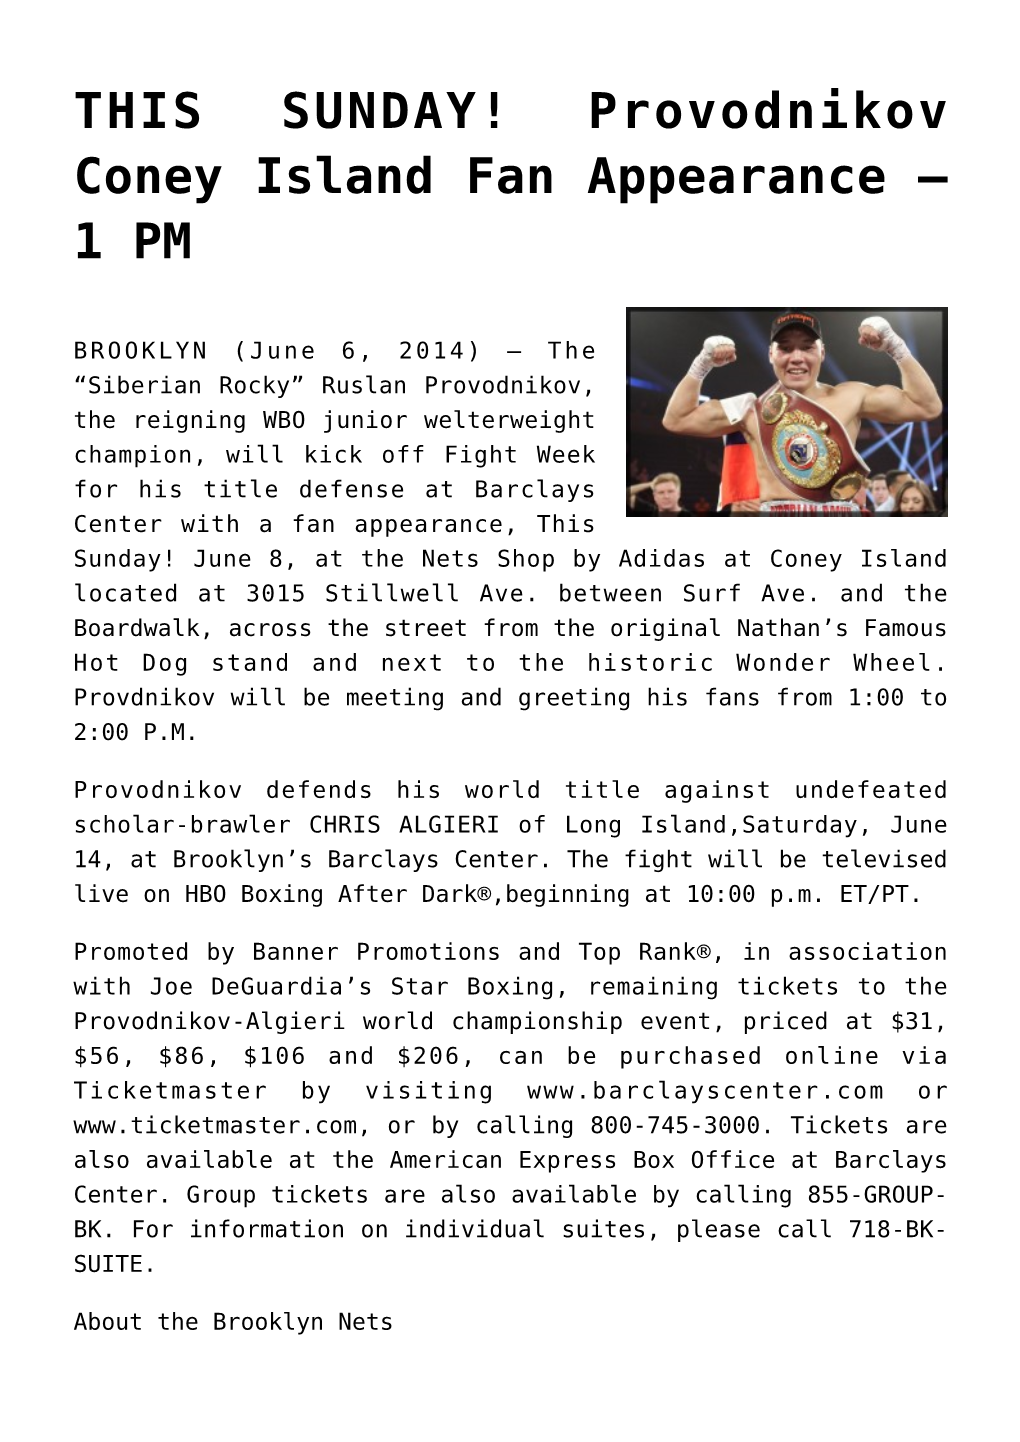 THIS SUNDAY! Provodnikov Coney Island Fan Appearance &#8211